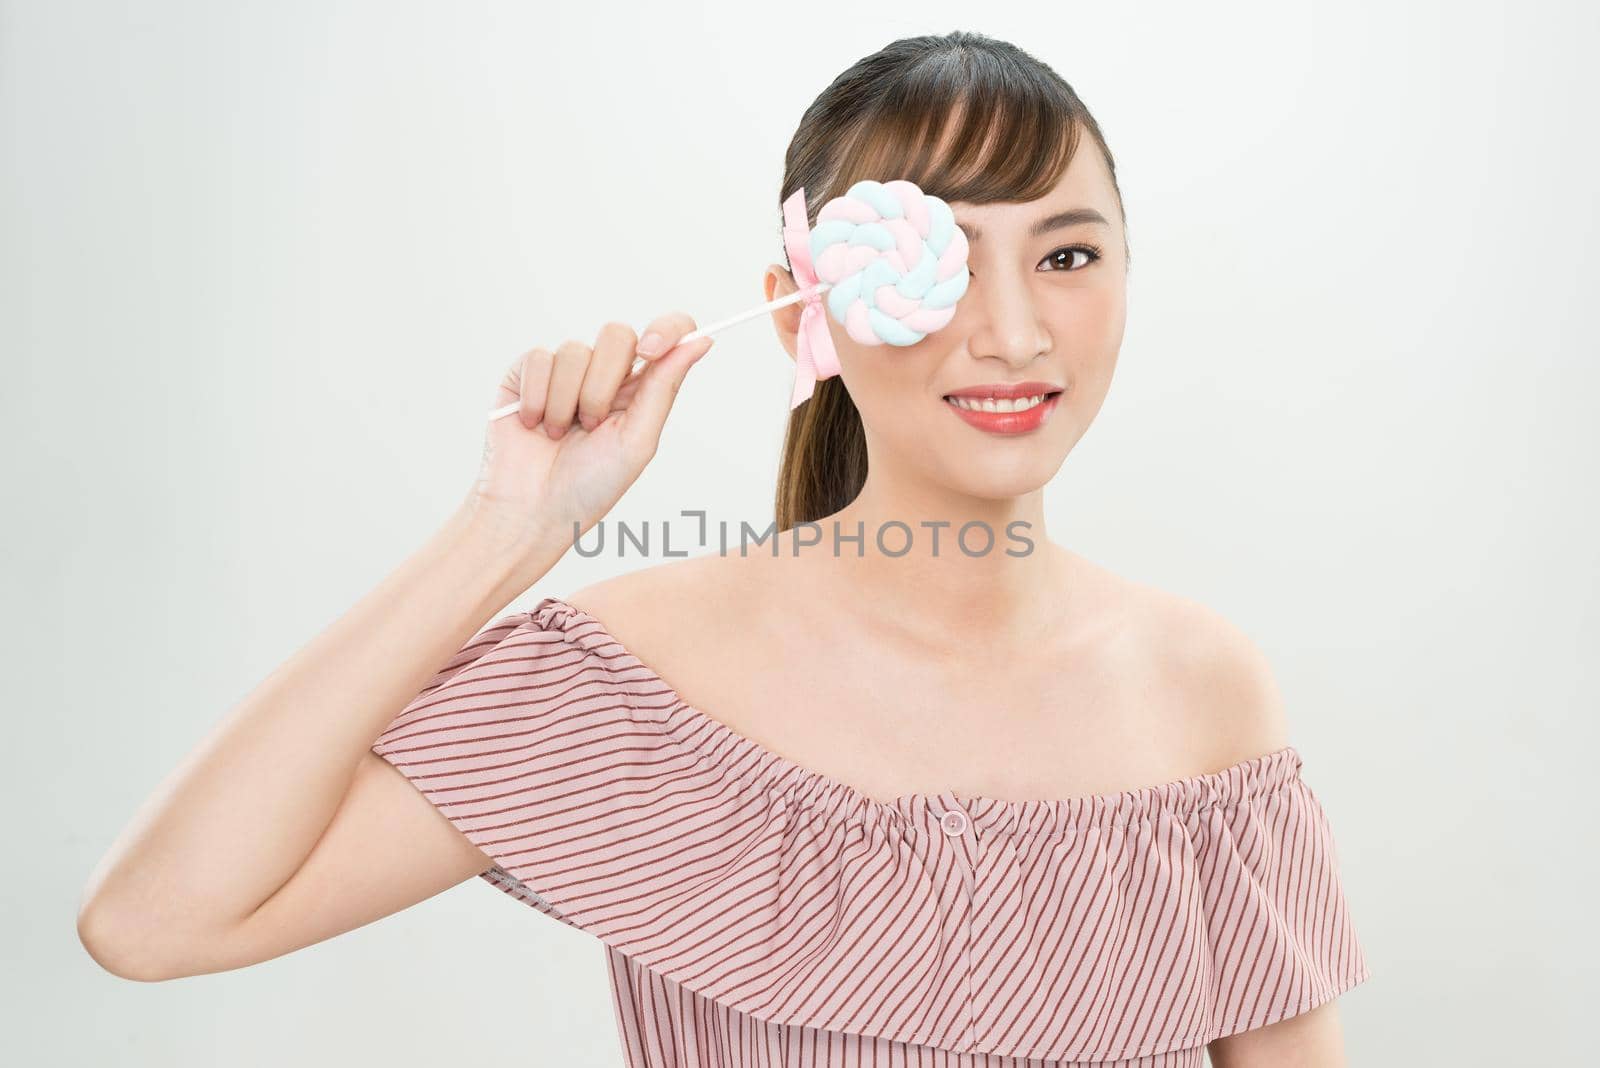 Short hair asian young beautiful woman smiling, covering her eye with lollipop. isolated over white background.